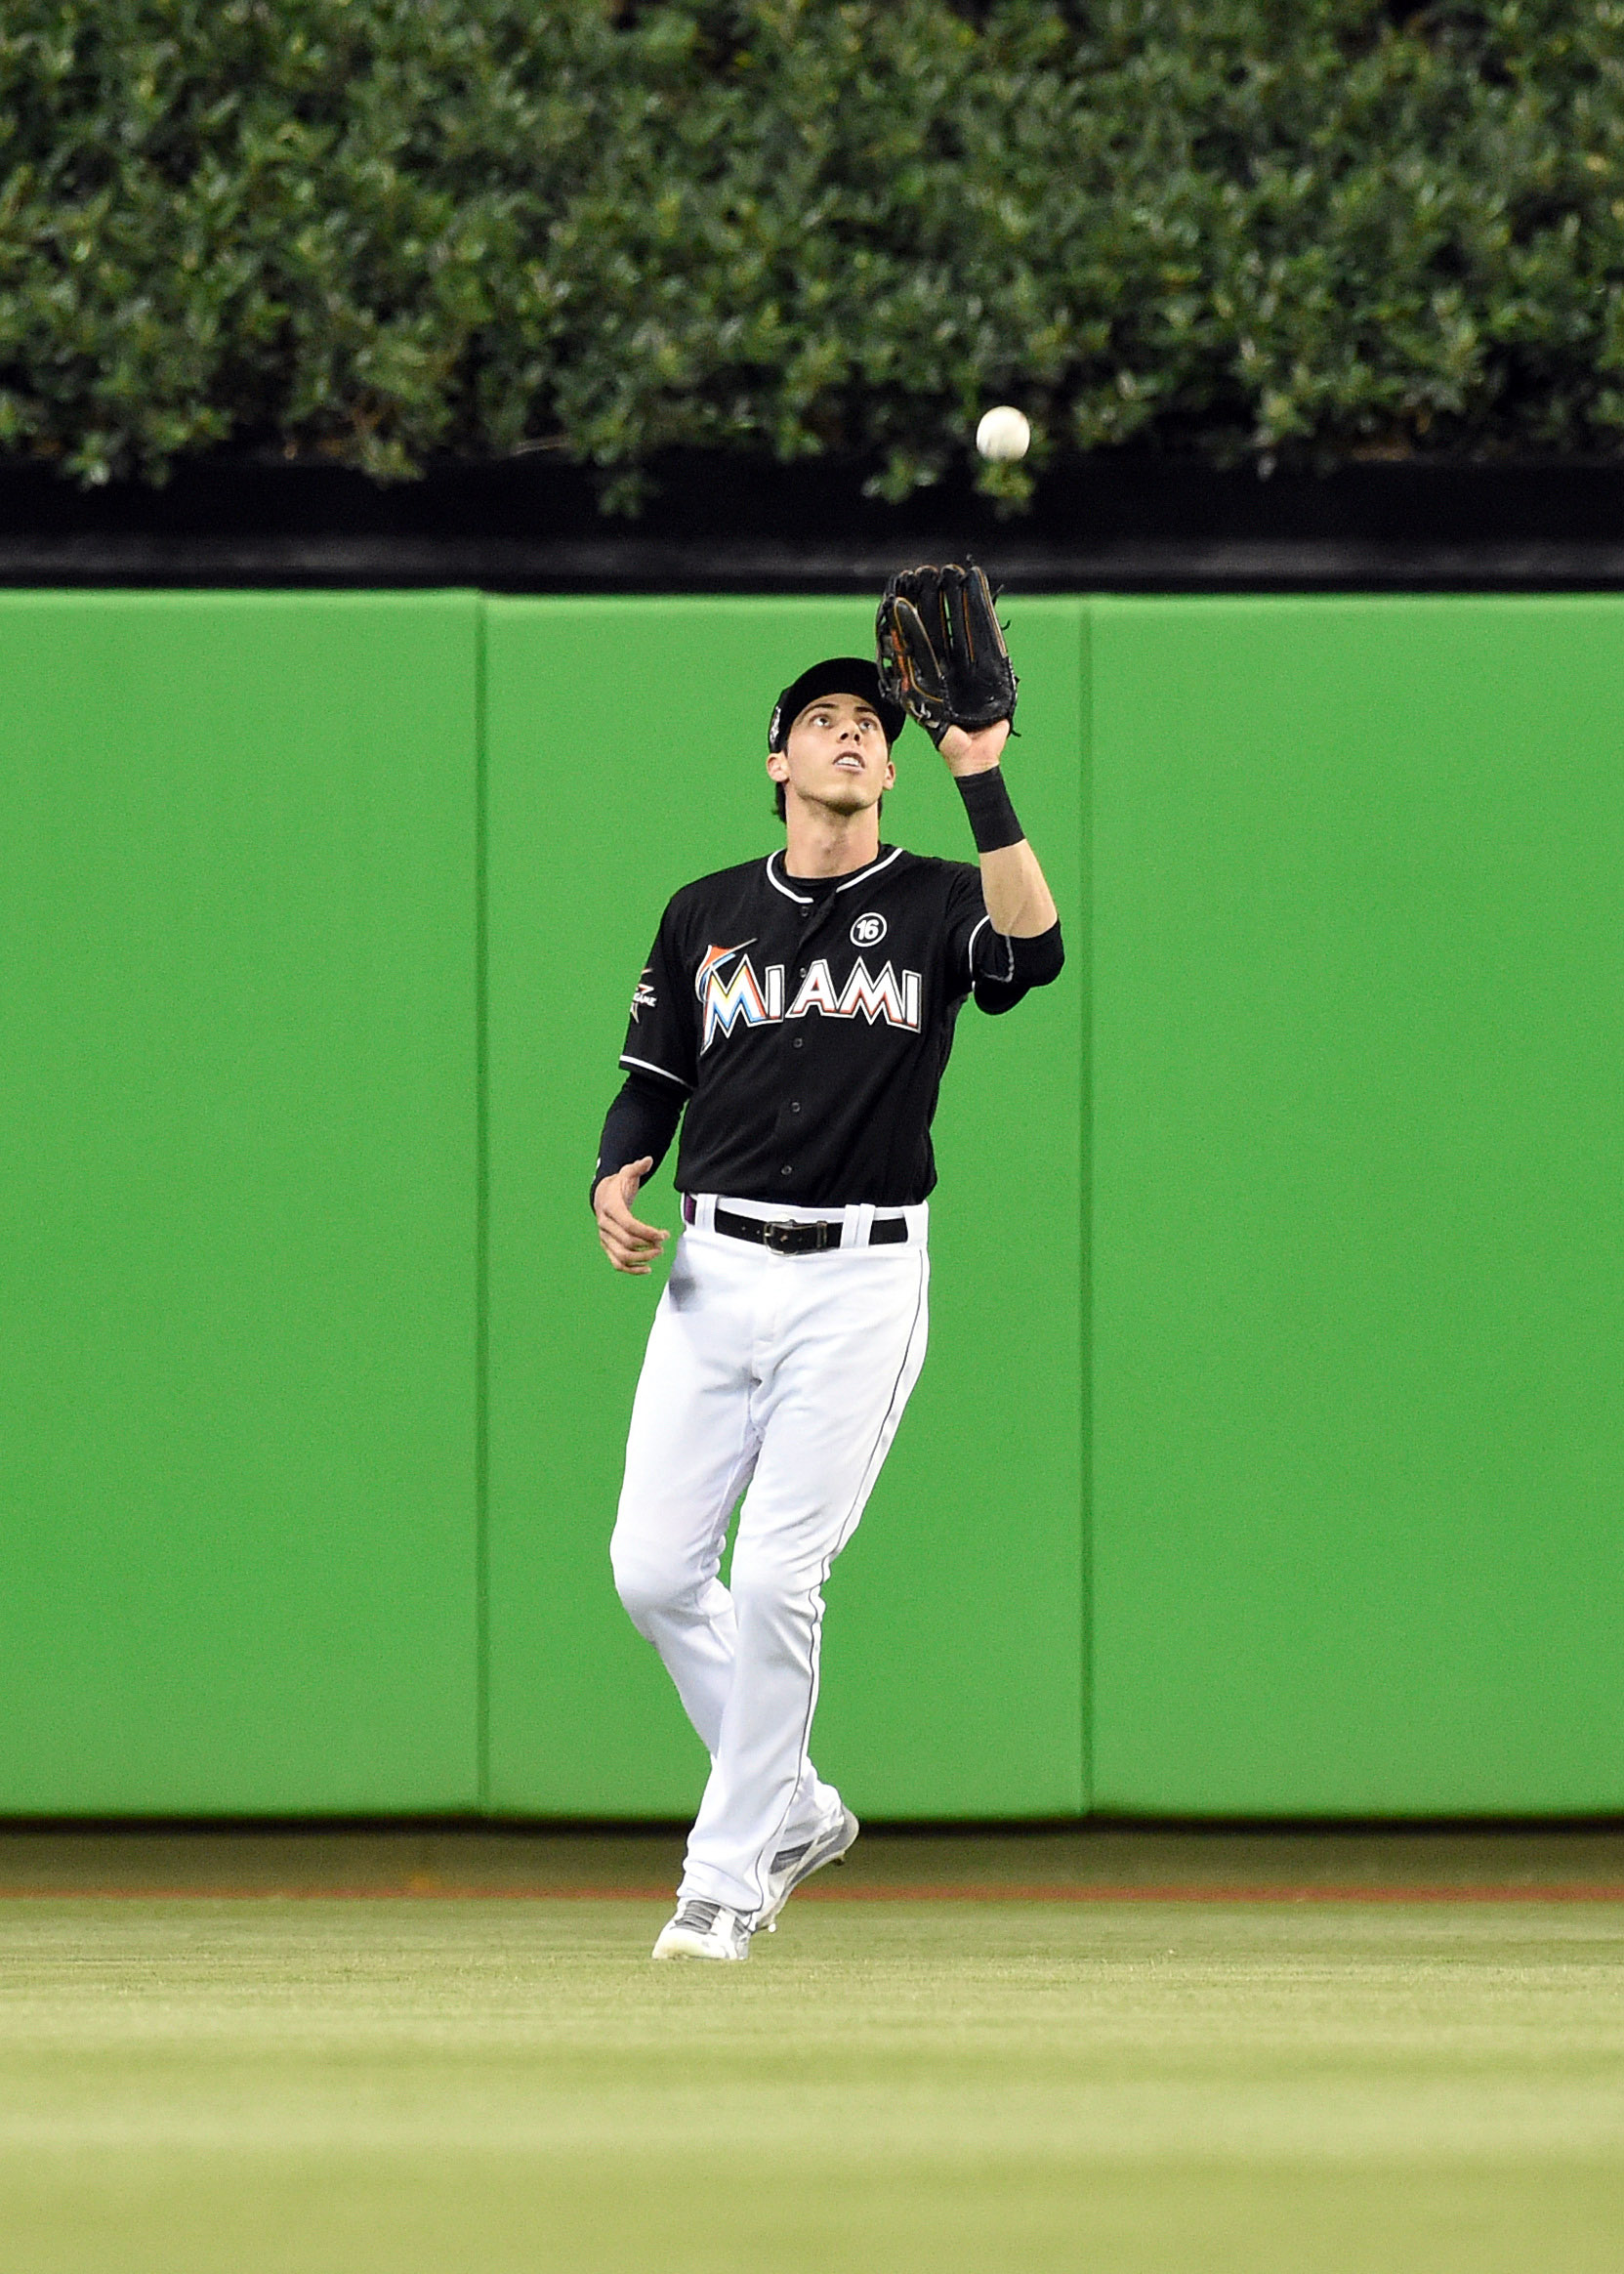 Marlins Agree To Extension With Christian Yelich - MLB Trade Rumors